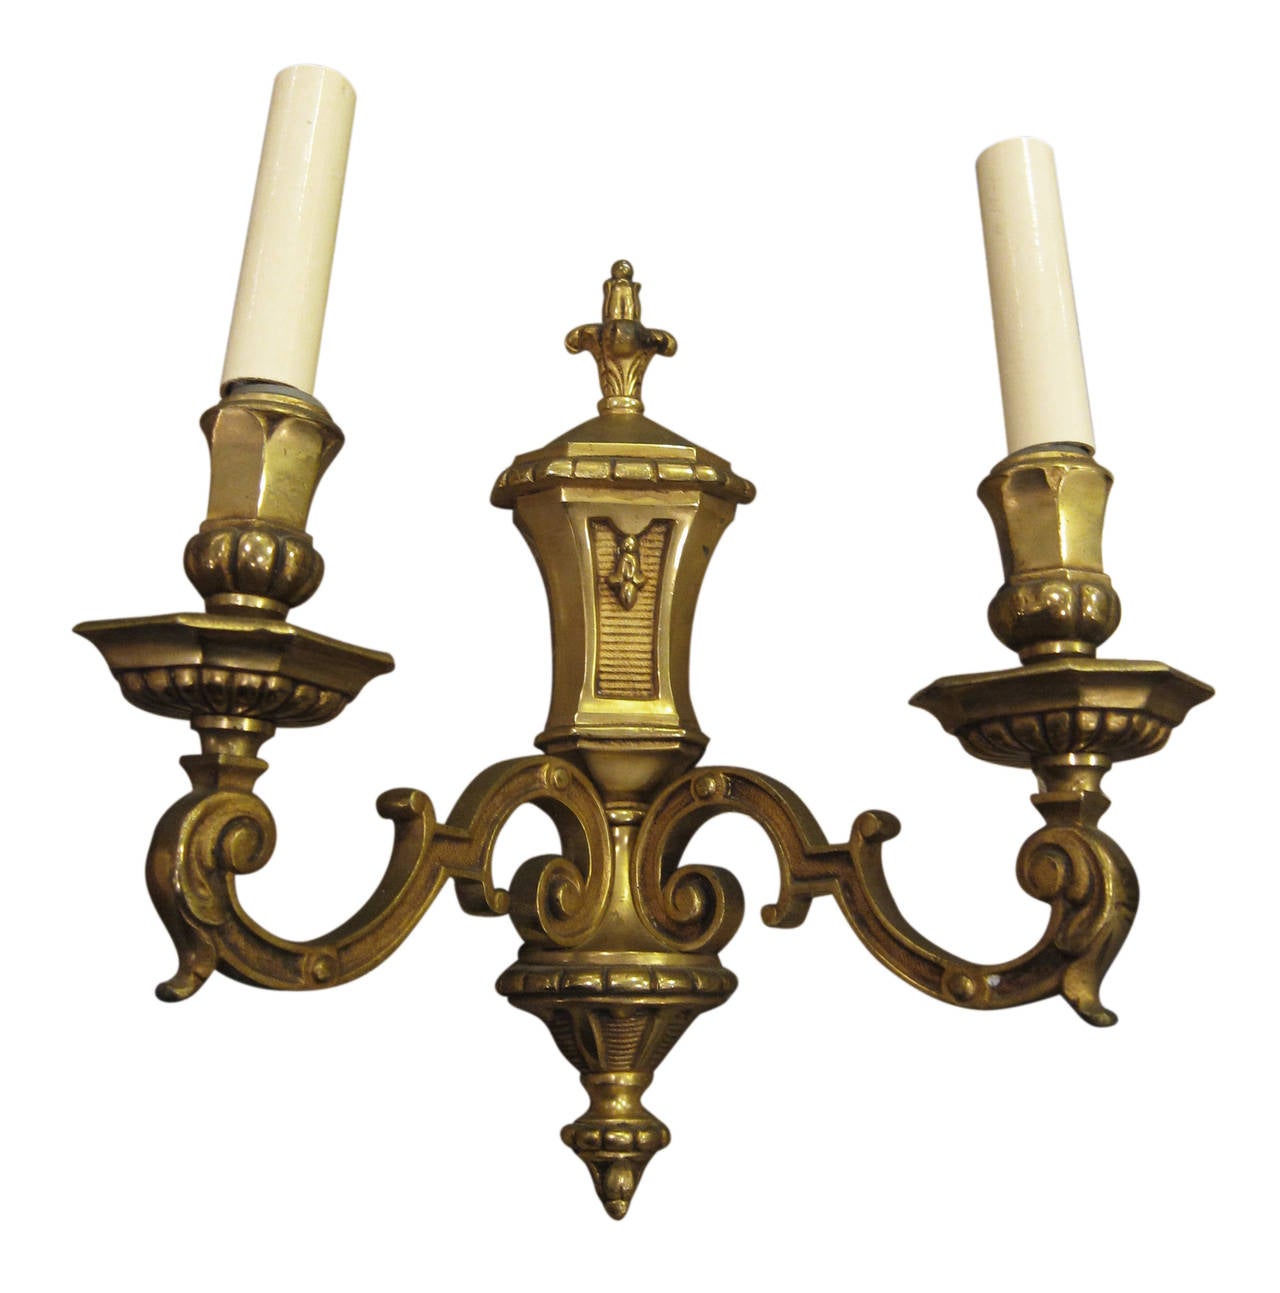 1930s French Empire style gilt bronze two-arm sconces. This can be seen at our 400 Gilligan St location in Scranton, PA.